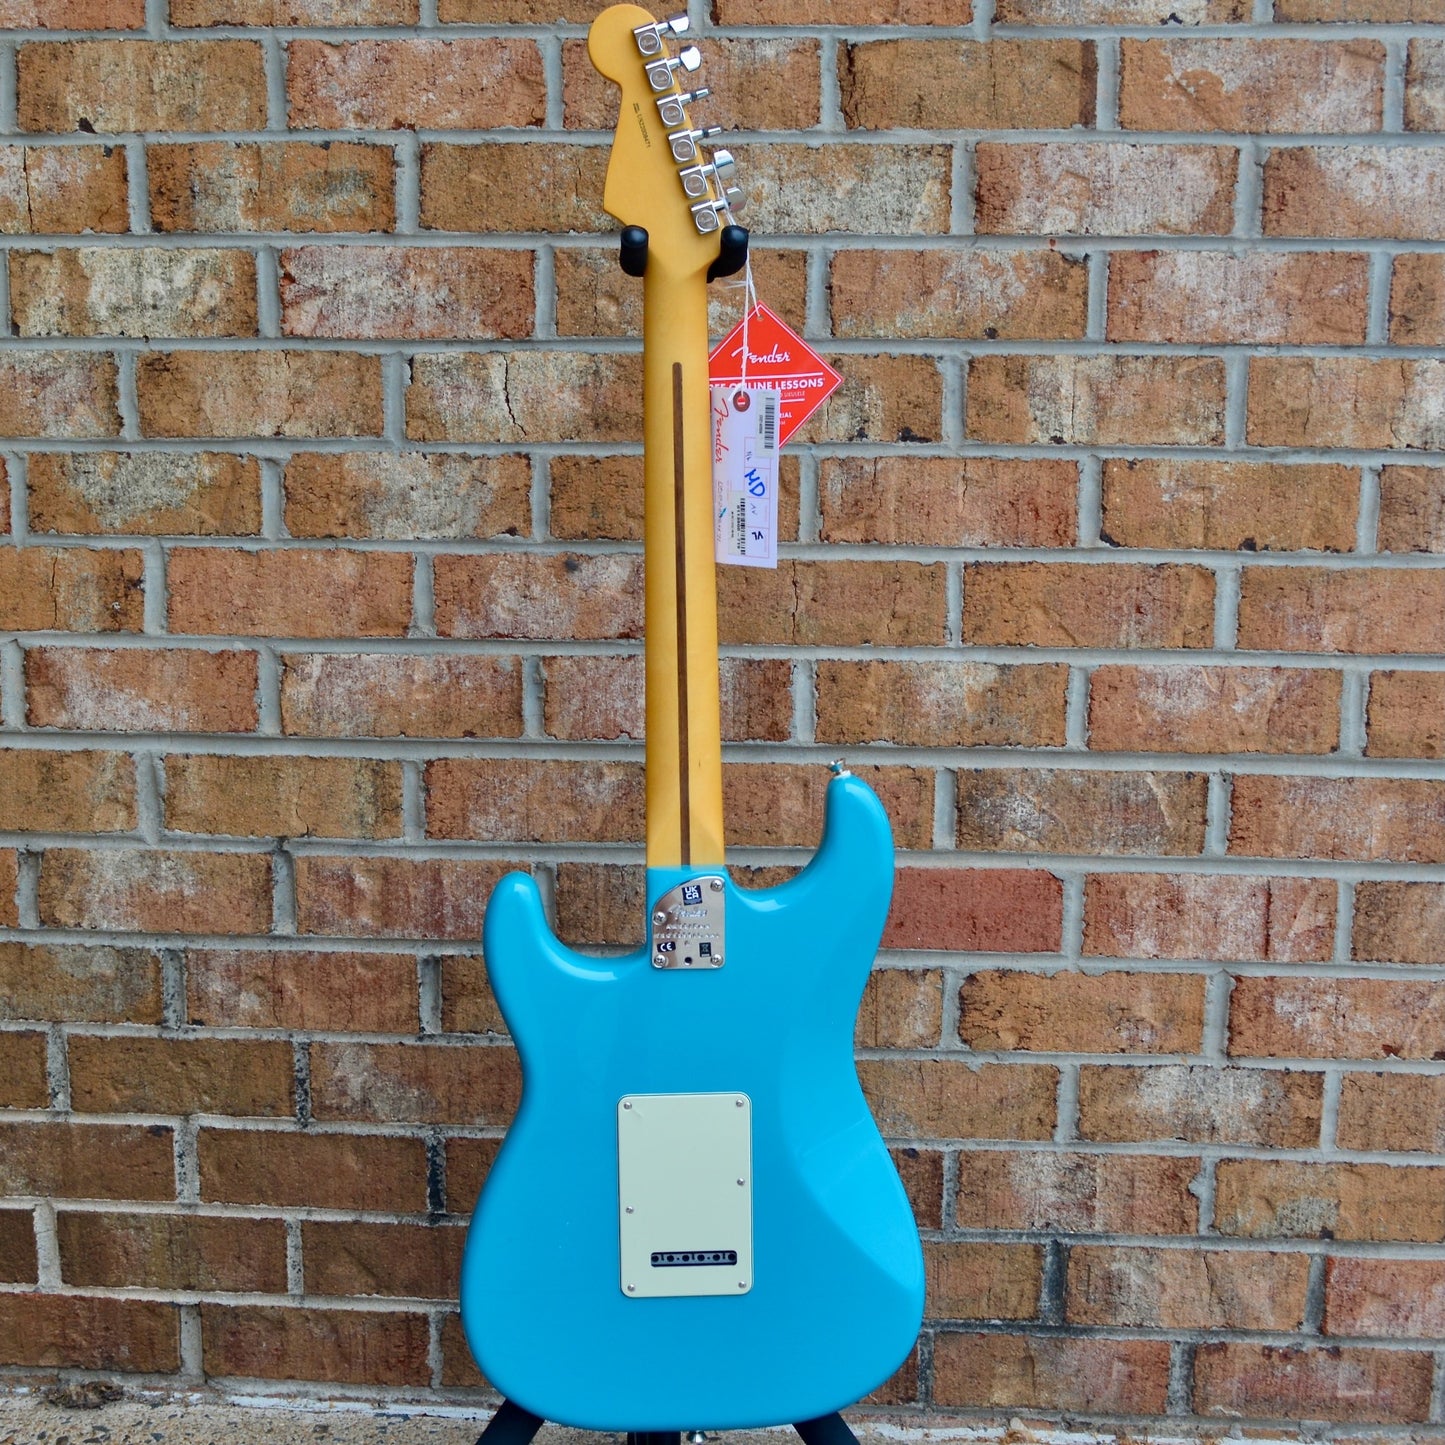 Fender American Professional II Stratocaster®, Rosewood Fingerboard, Miami Blue